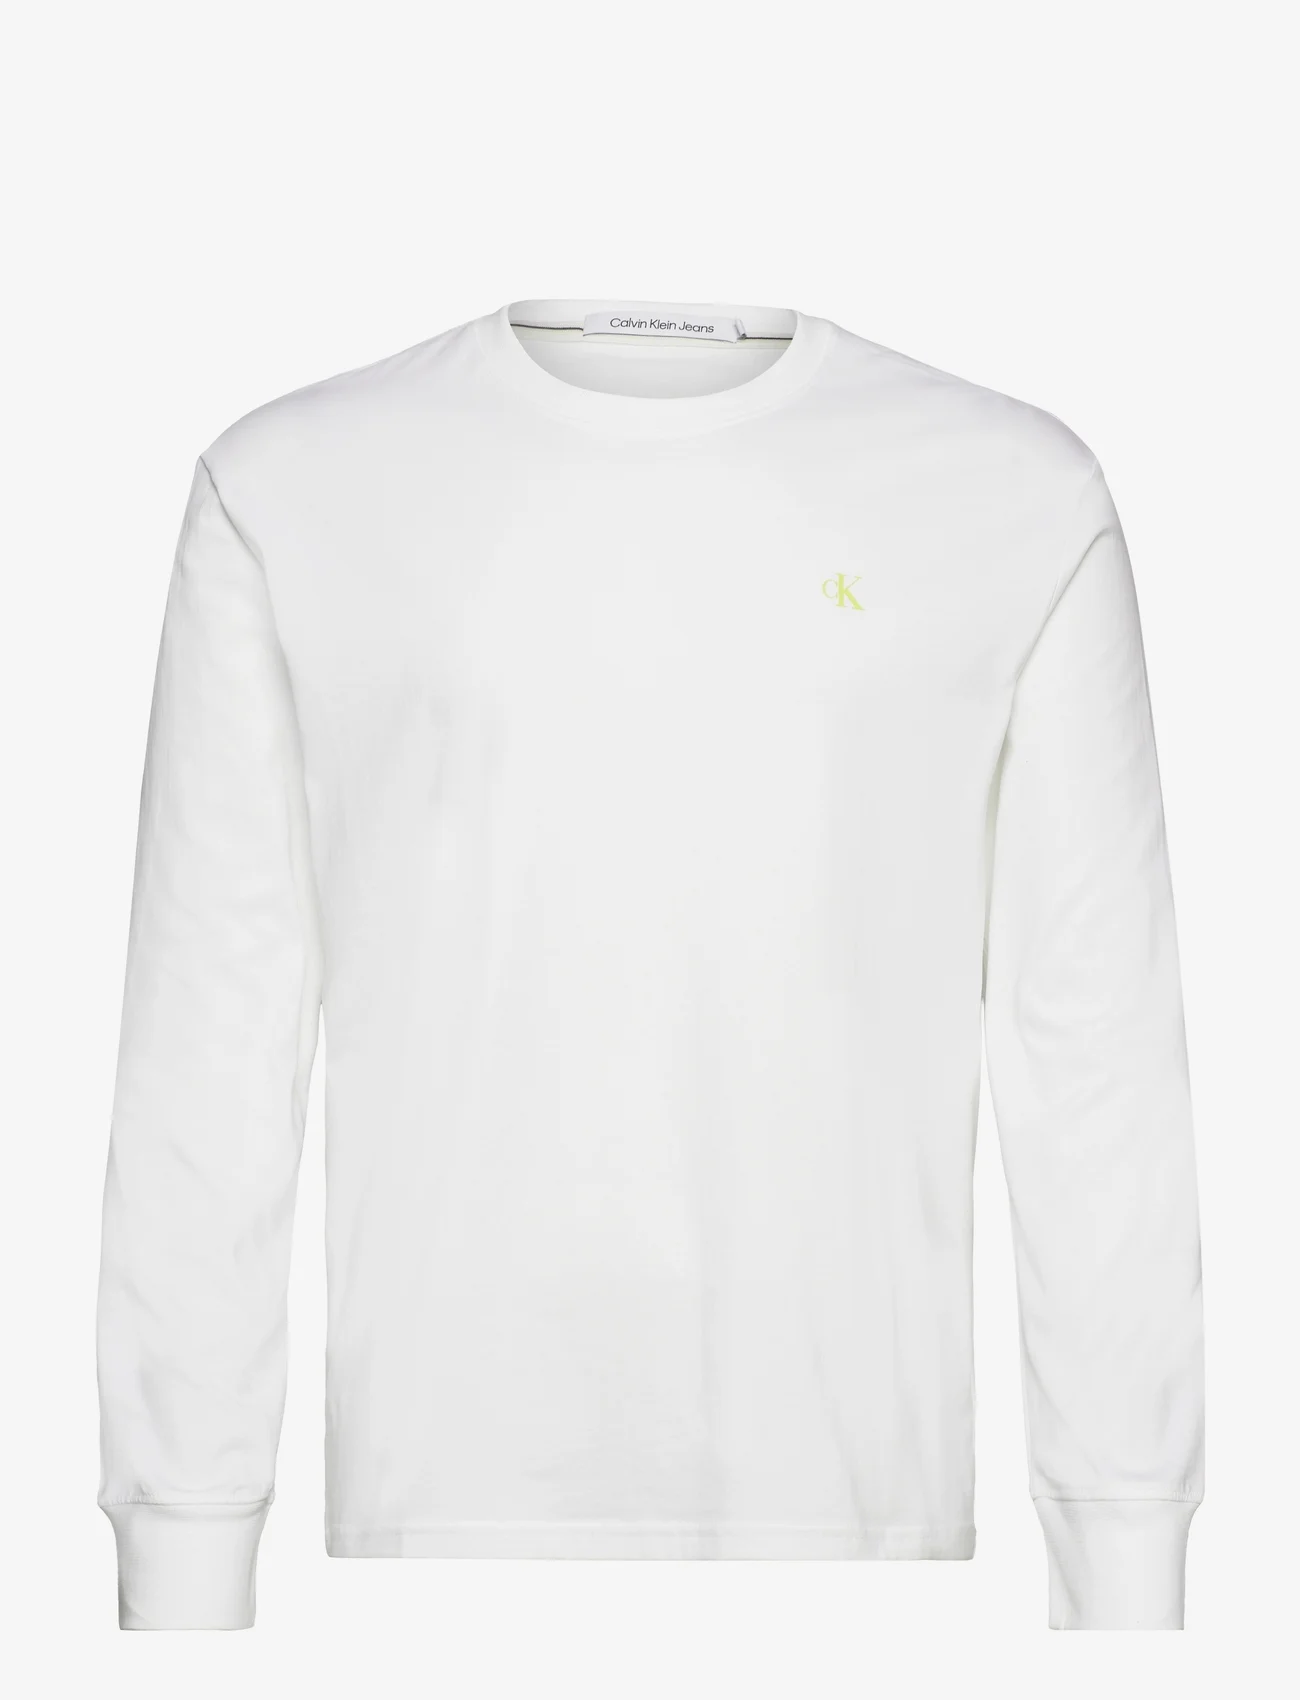 Calvin Klein Jeans - INSTITUTIONAL LS GRAPHIC TEE - basic t-shirts - bright white - 0